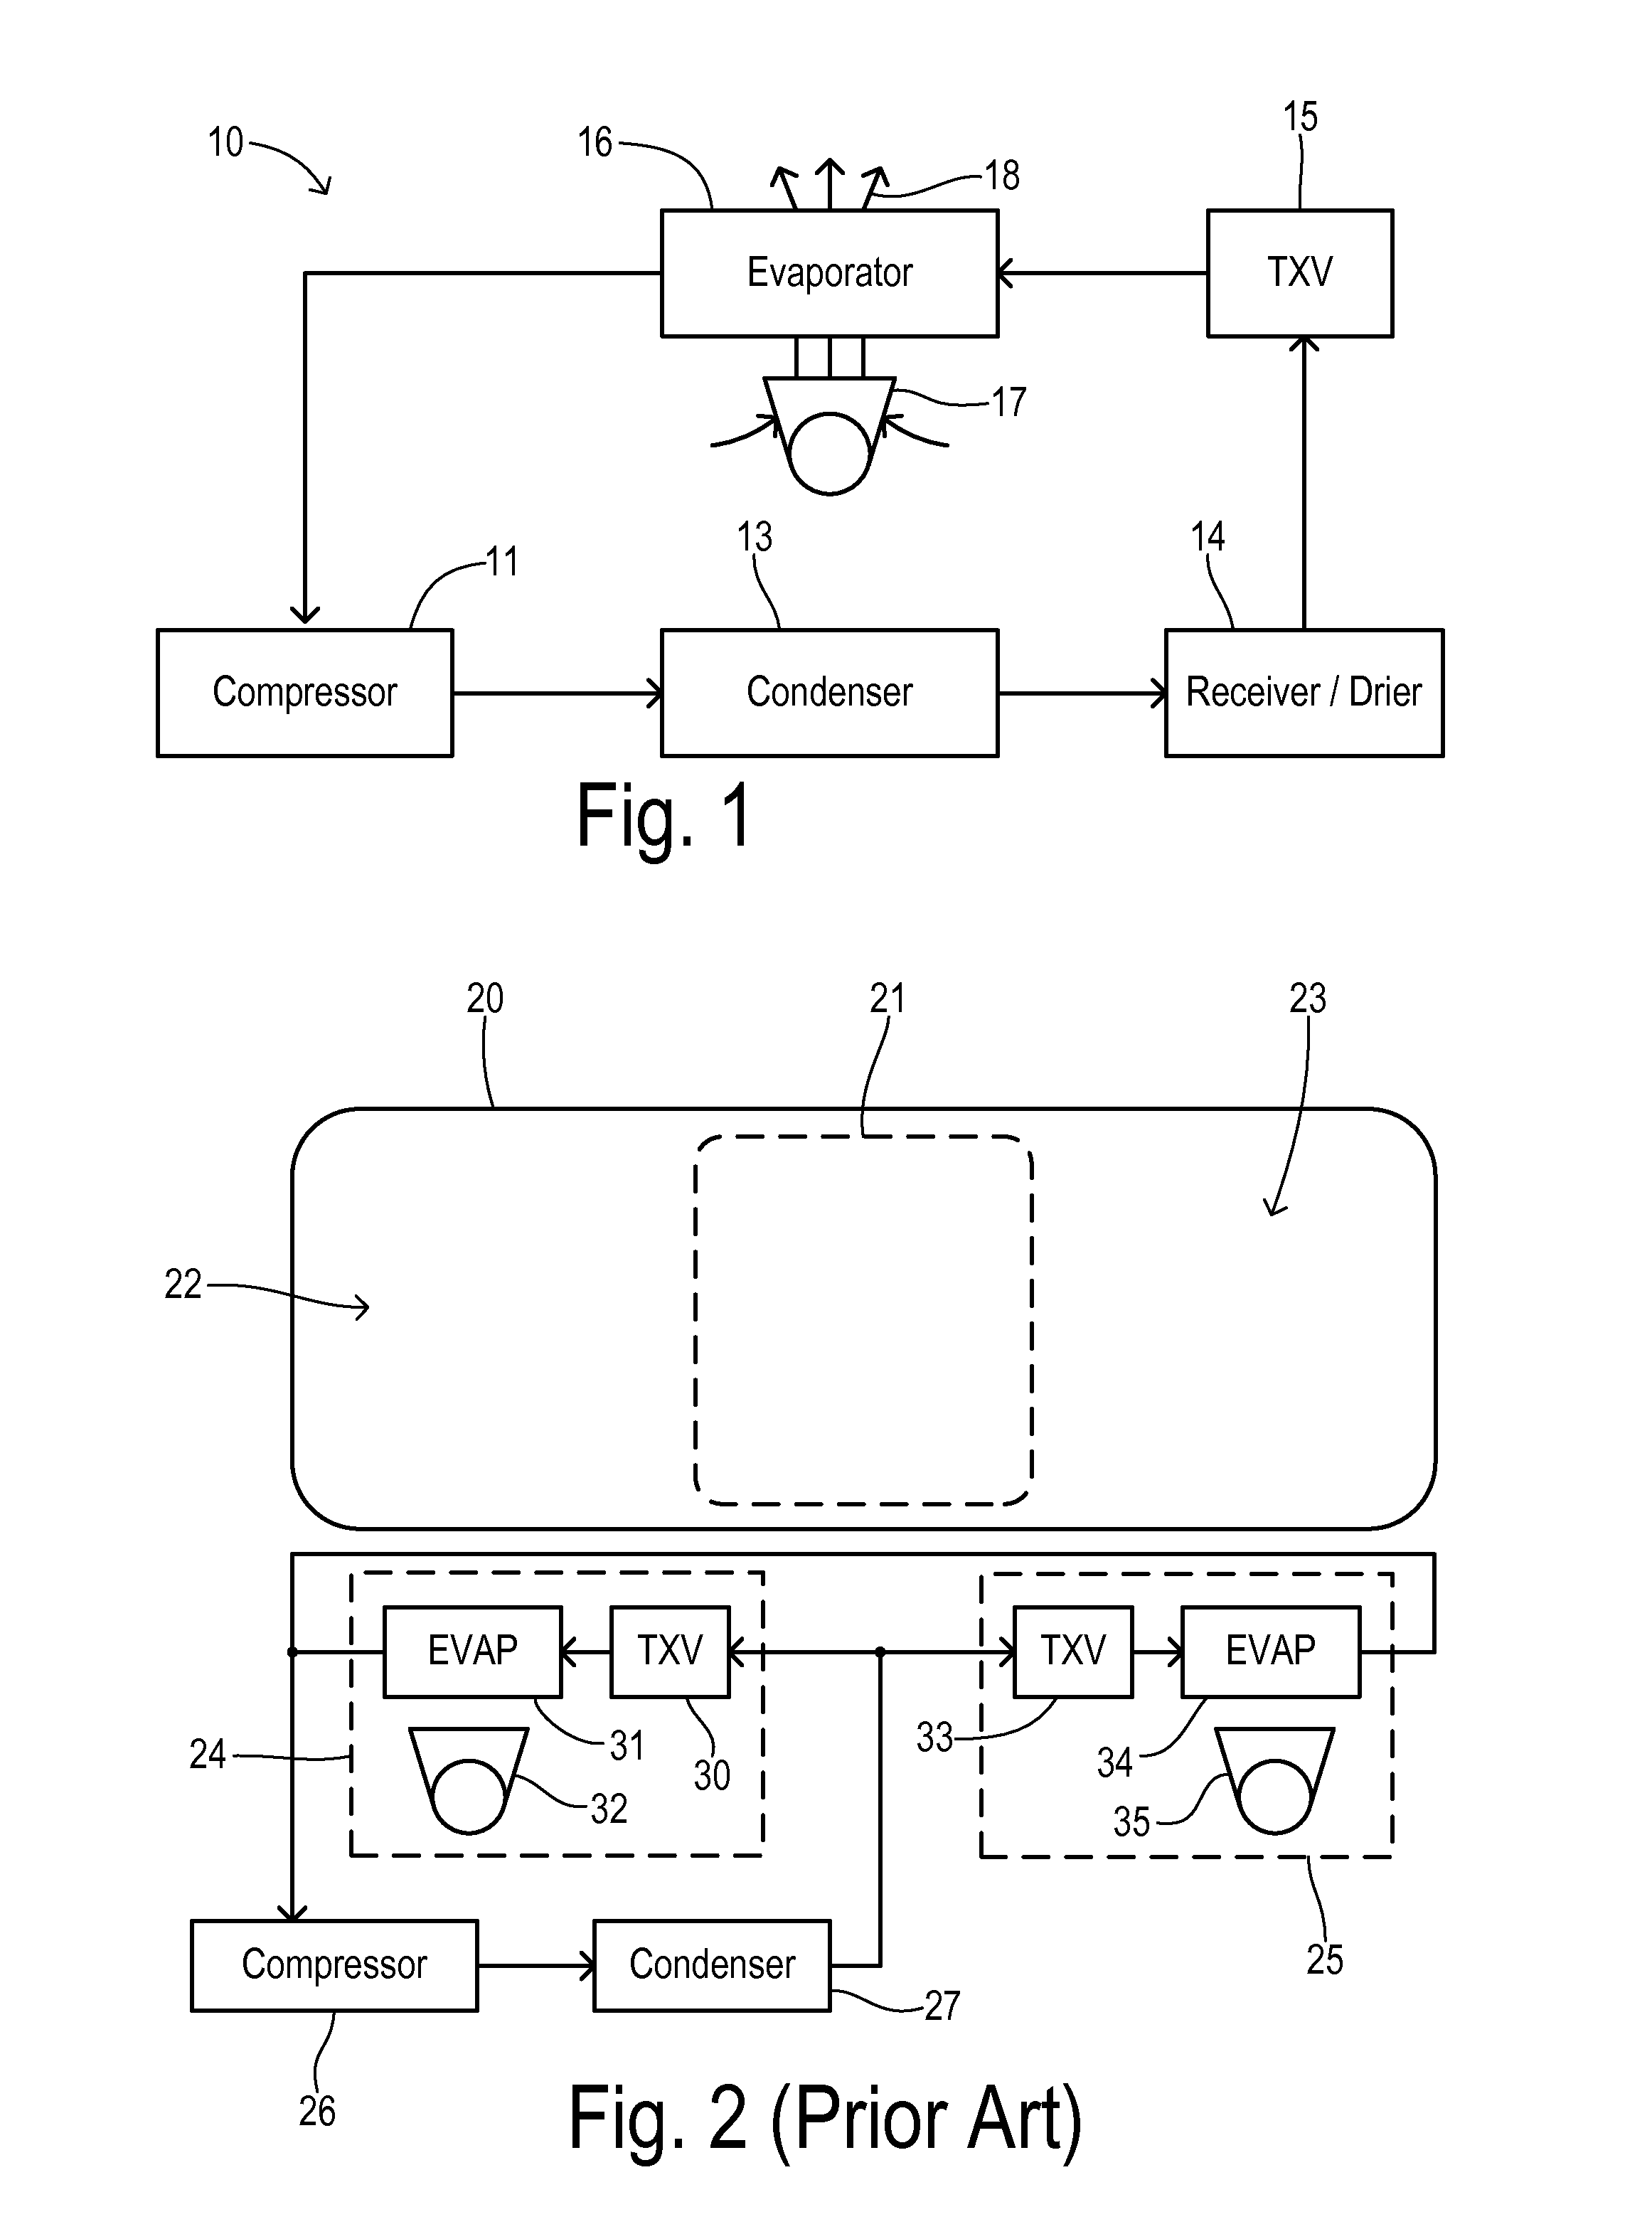 Air Conditioner with Series/Parallel Secondary Evaporator and Single Expansion Valve